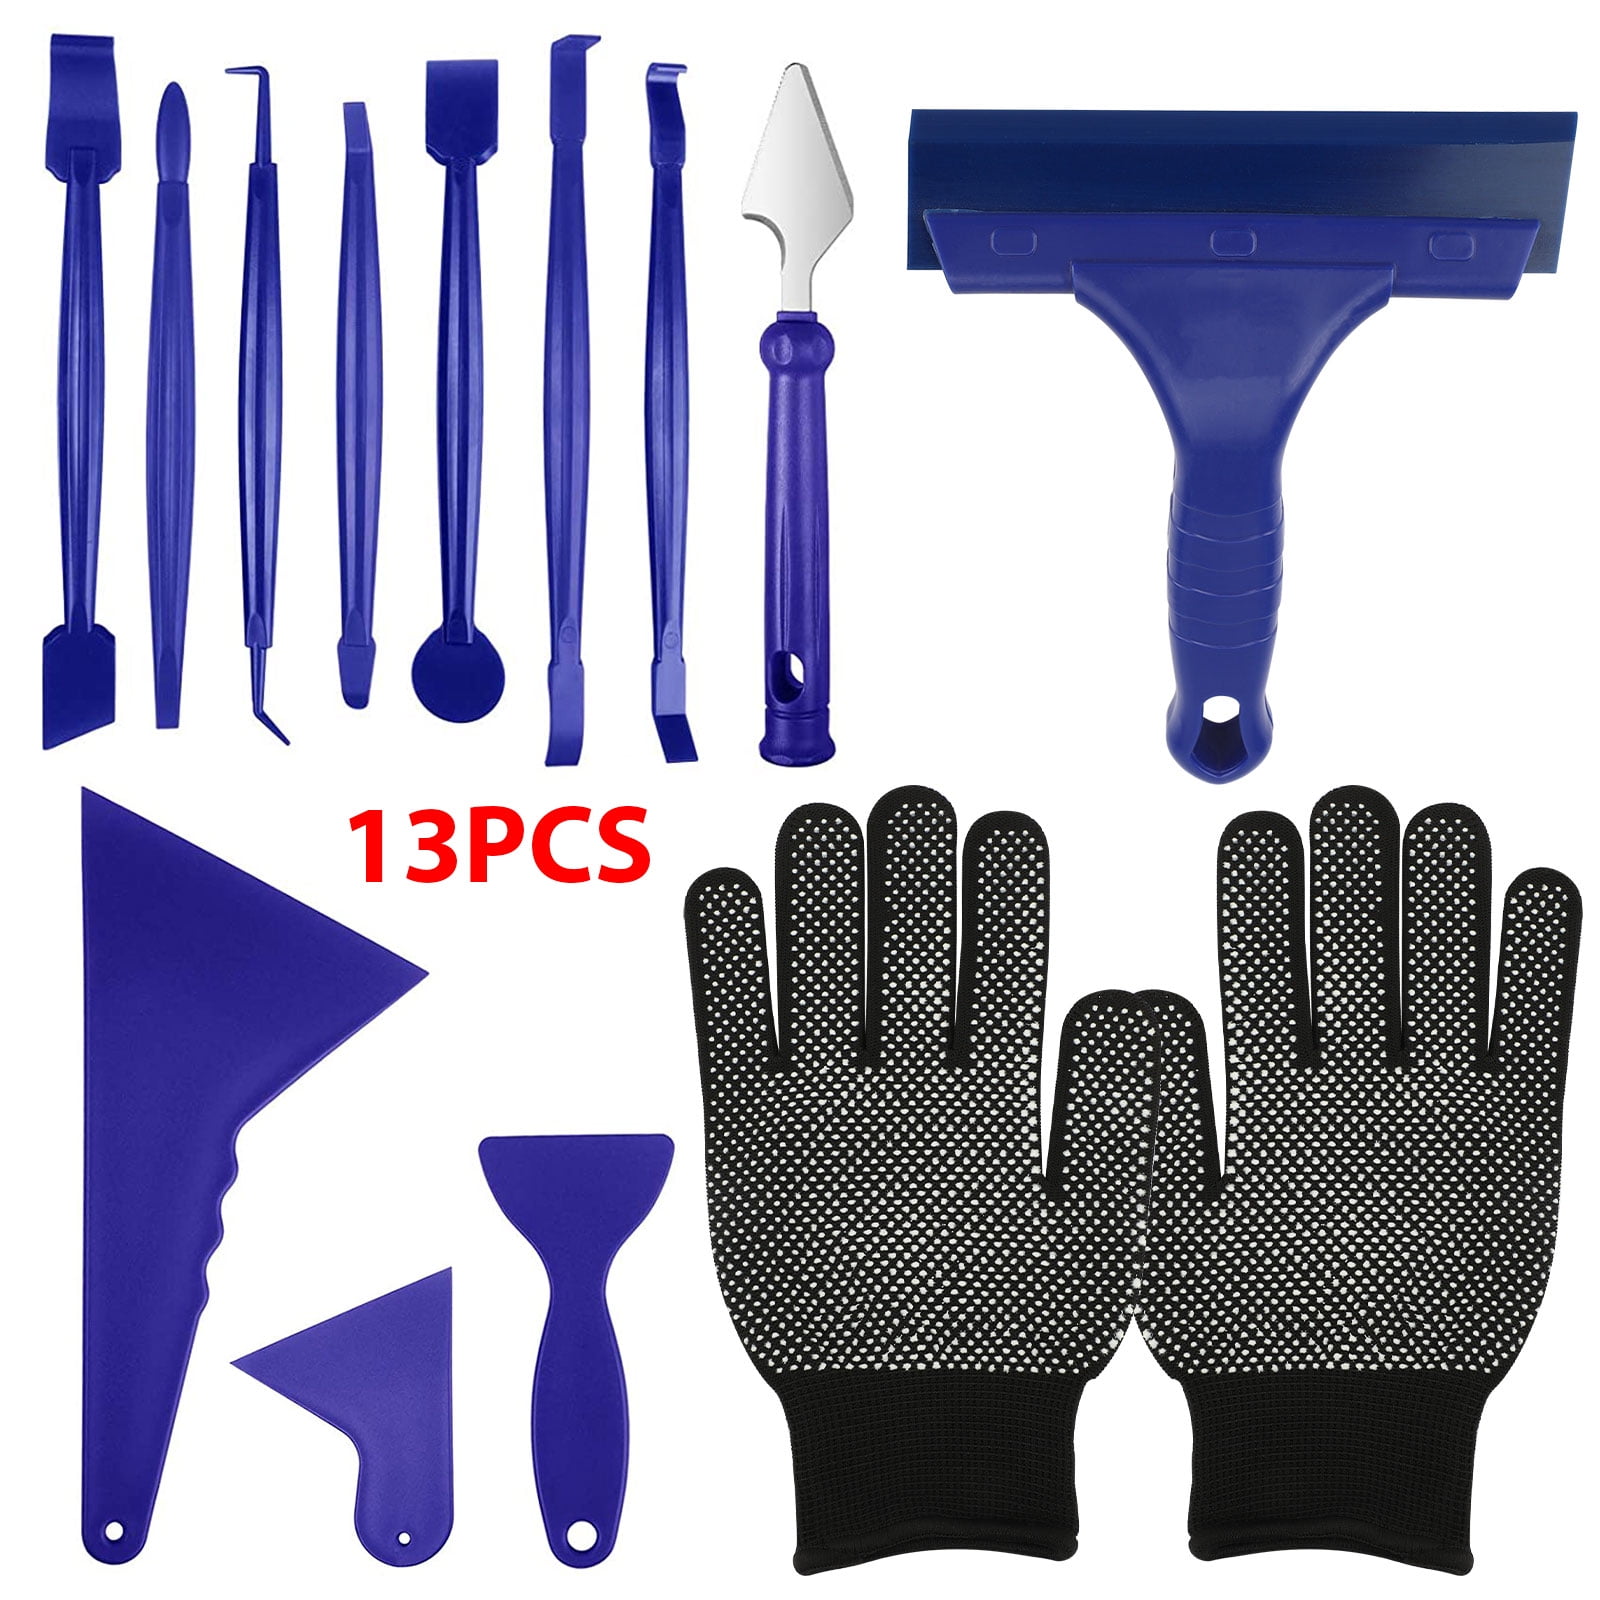 Car Window Tint Tools Kit Scraper Squeegee for Auto Film Tinting Installation